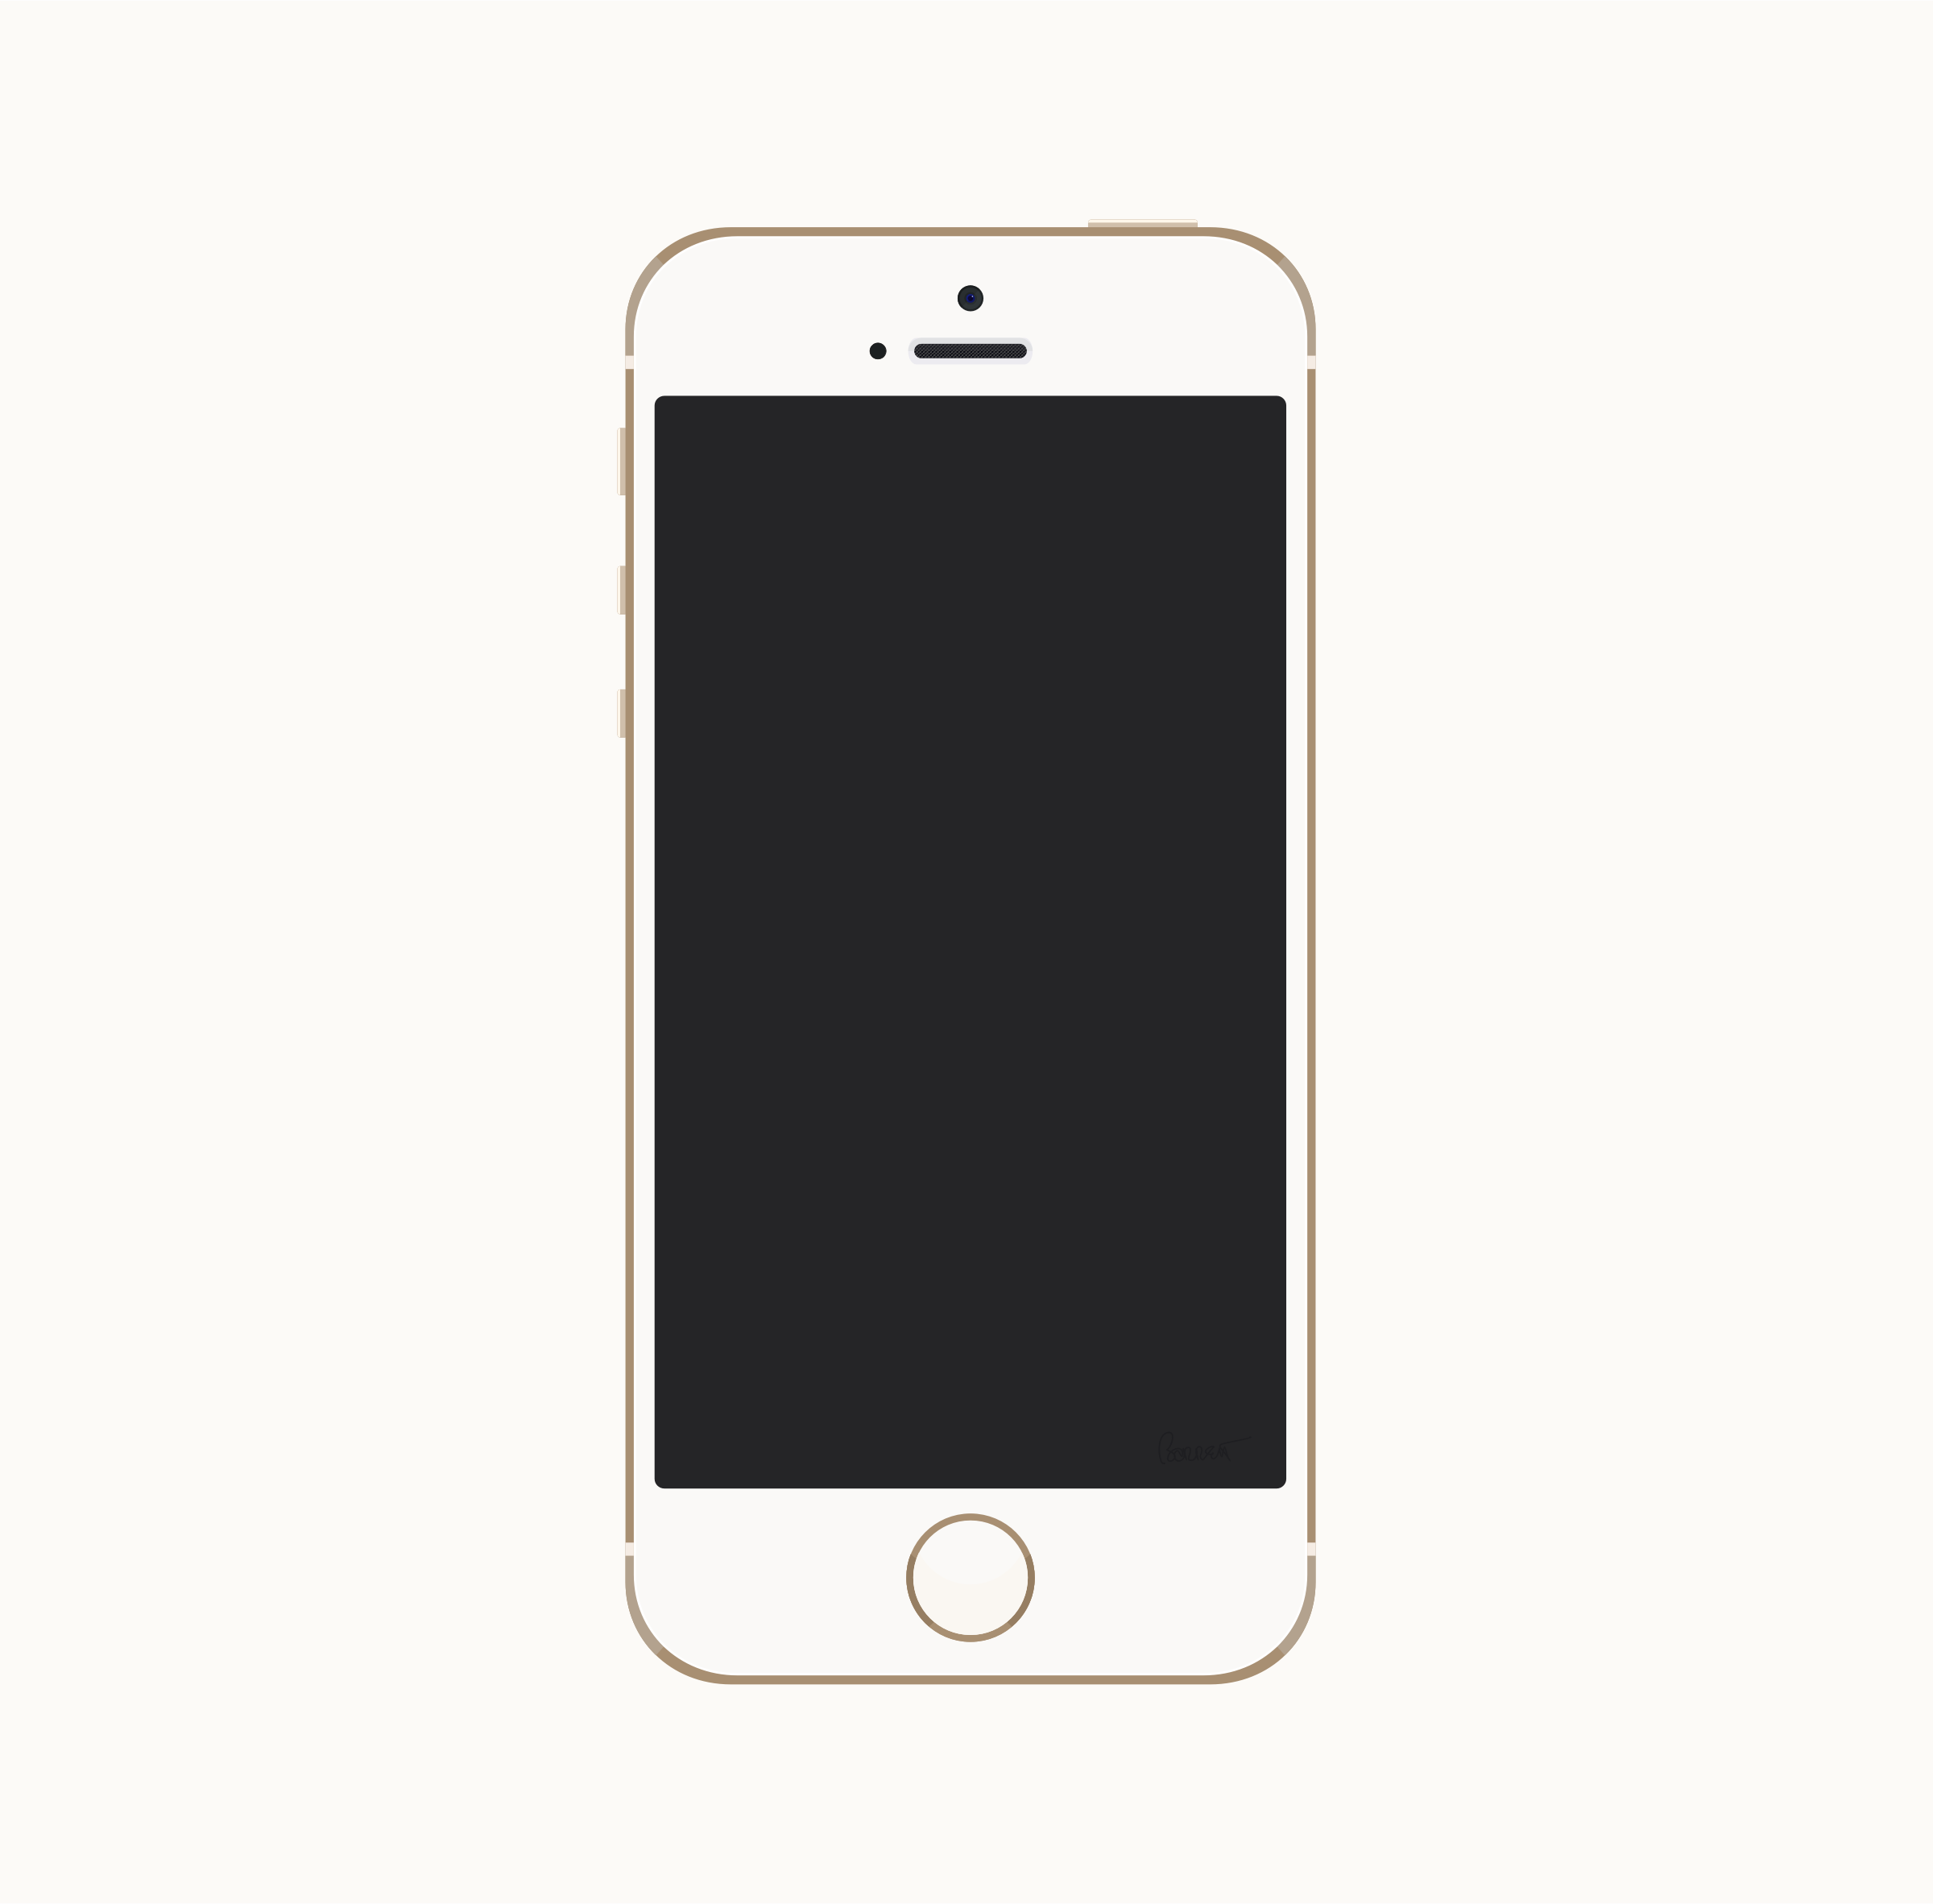 iphone clipart vector free - photo #35